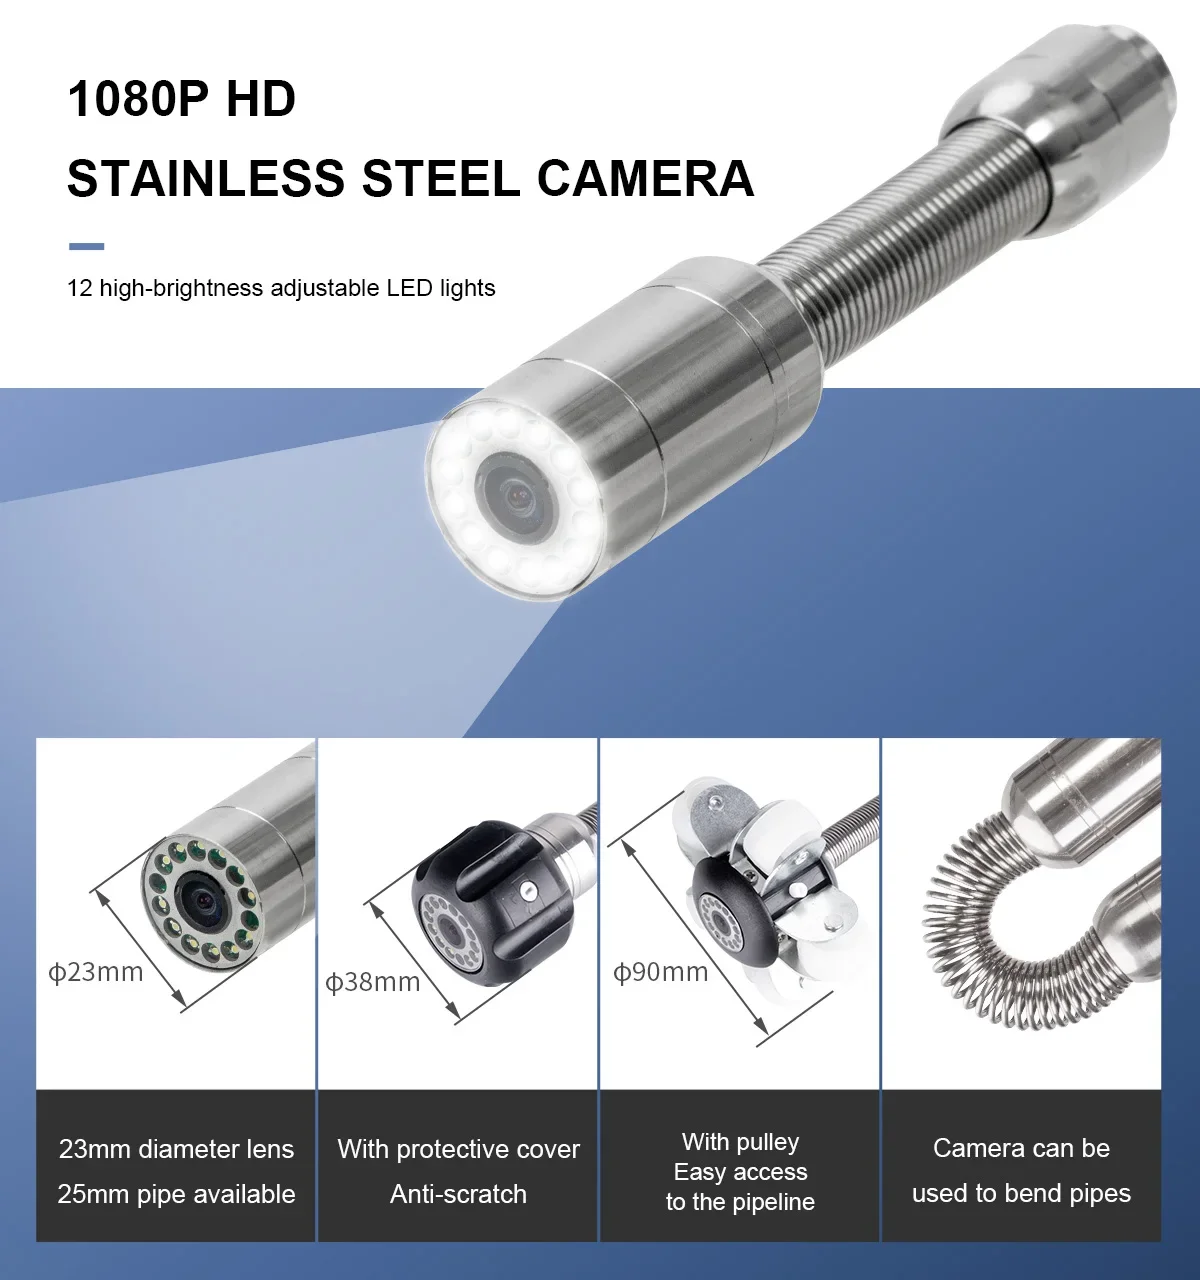 HD Well Pipe Inspection Video Camera Head Drain Sewer Pipeline Industrial Endoscope Accessories Deep Down Hole Detection